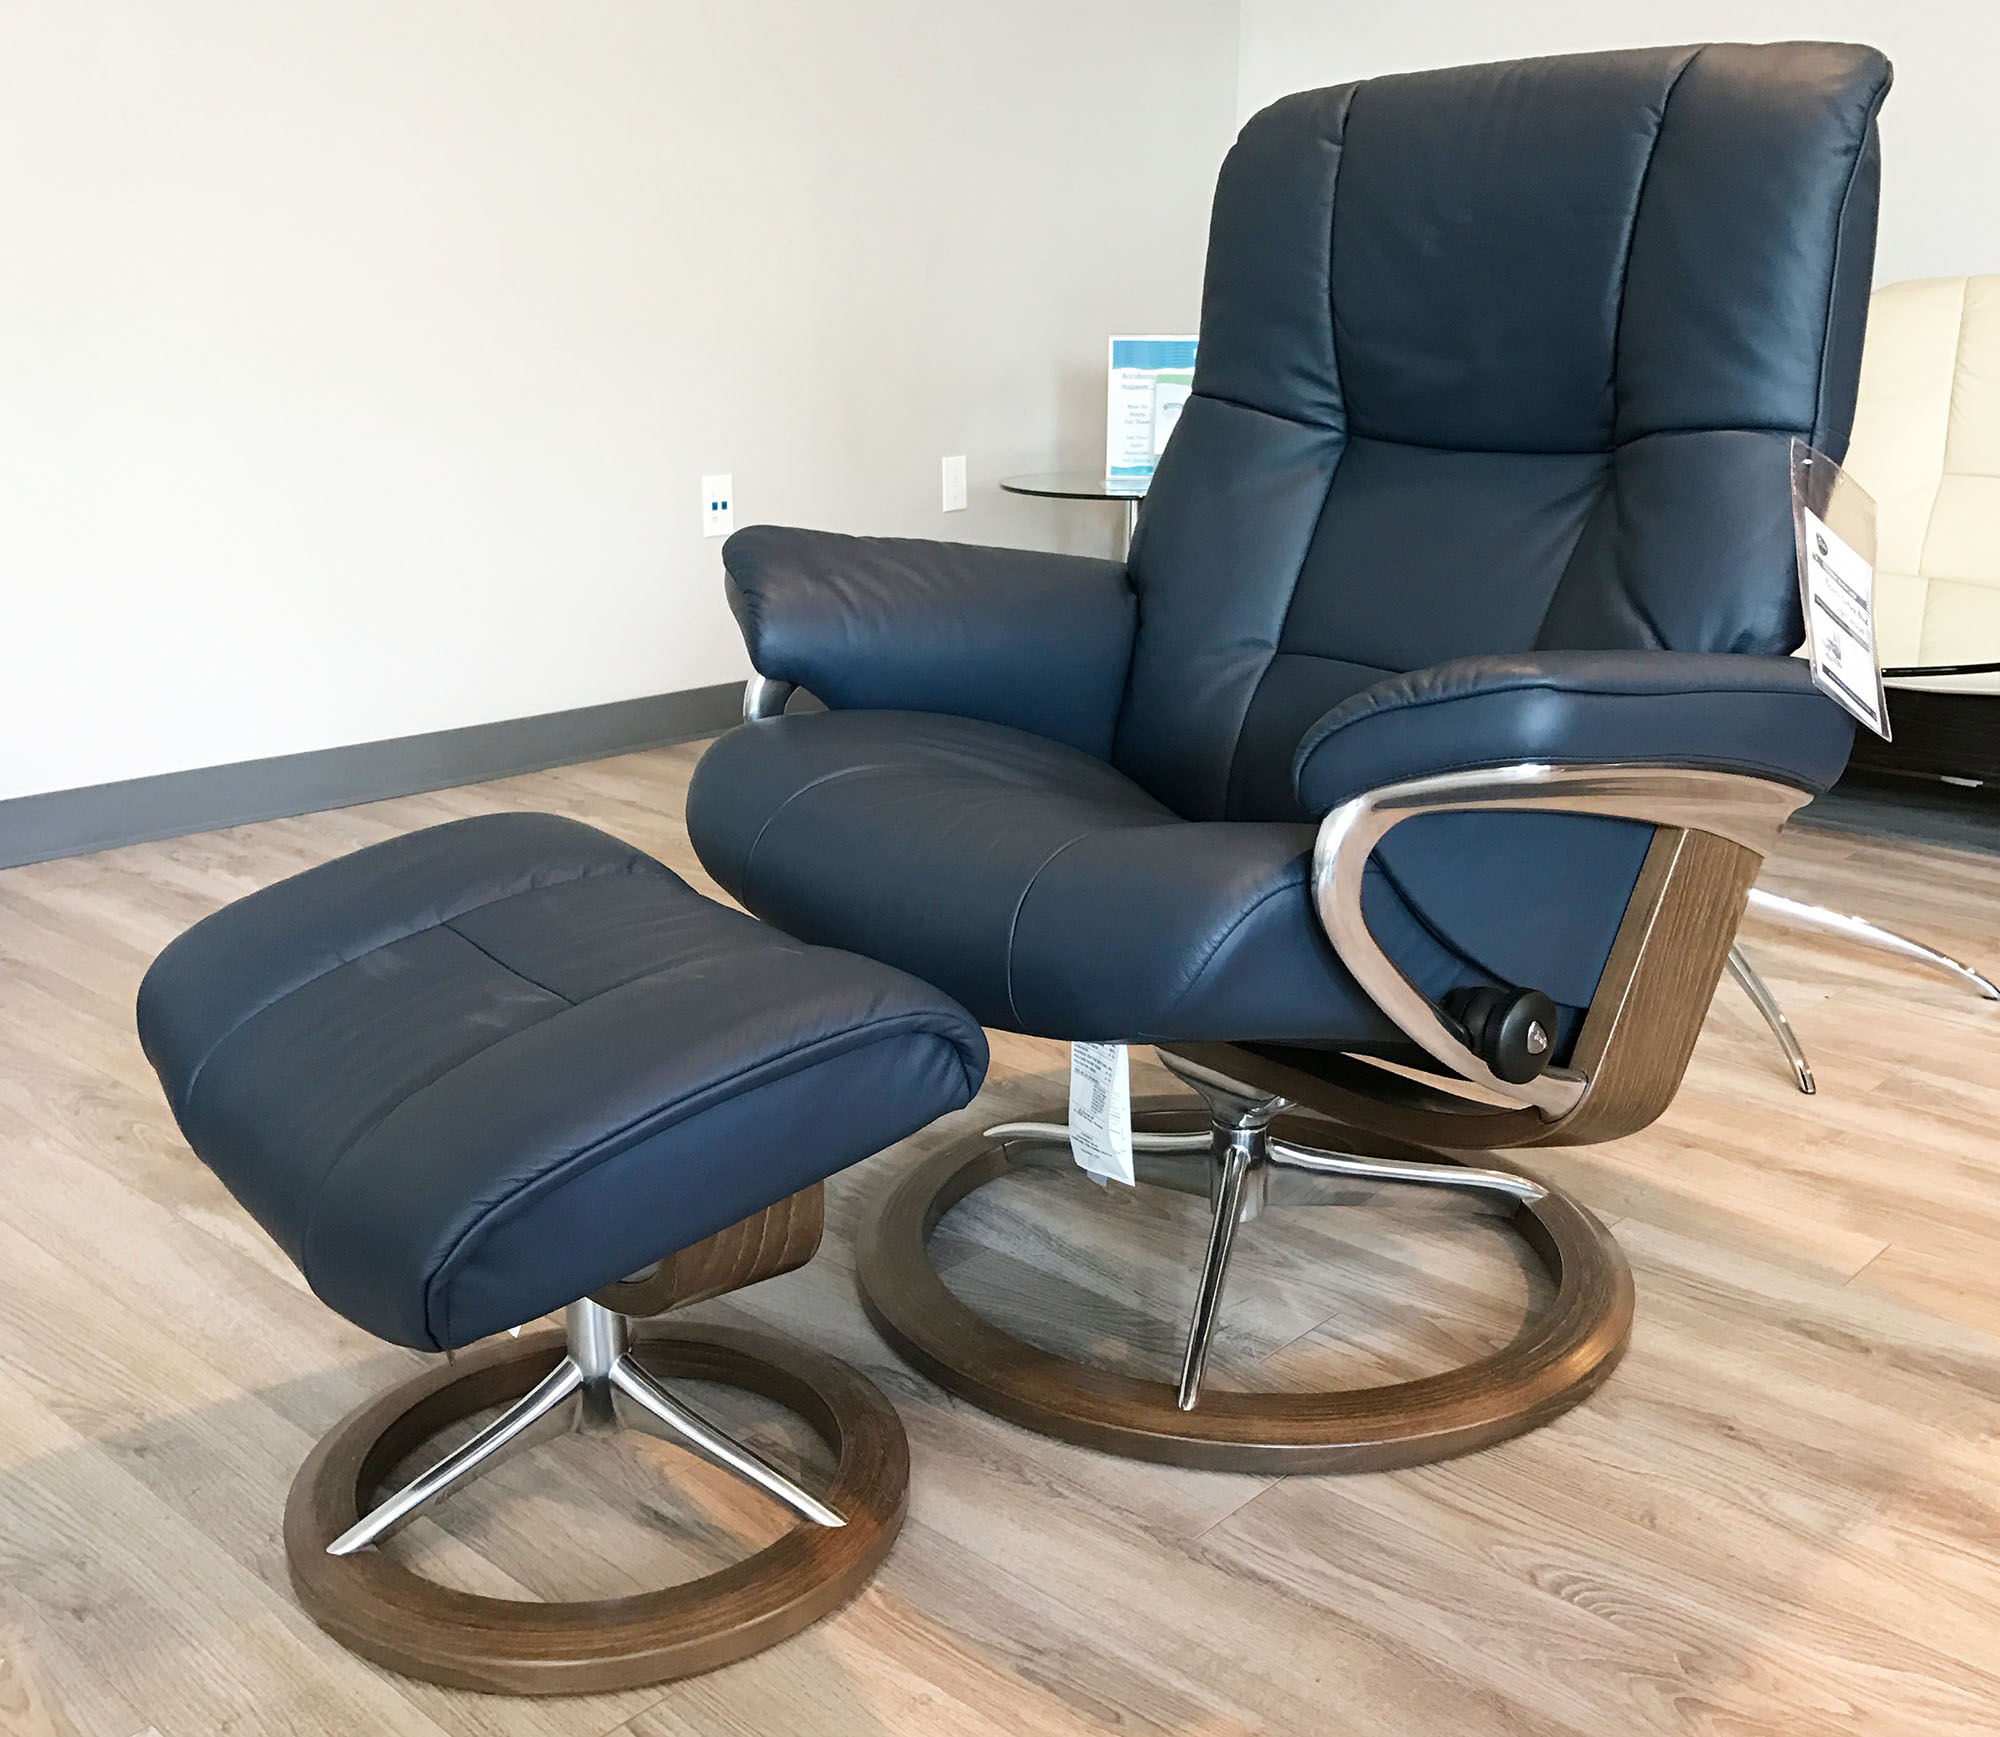 Stressless Mayfair Signature Walnut Wood Paloma Oxford Blue Leather Recliner Chair and Ottoman